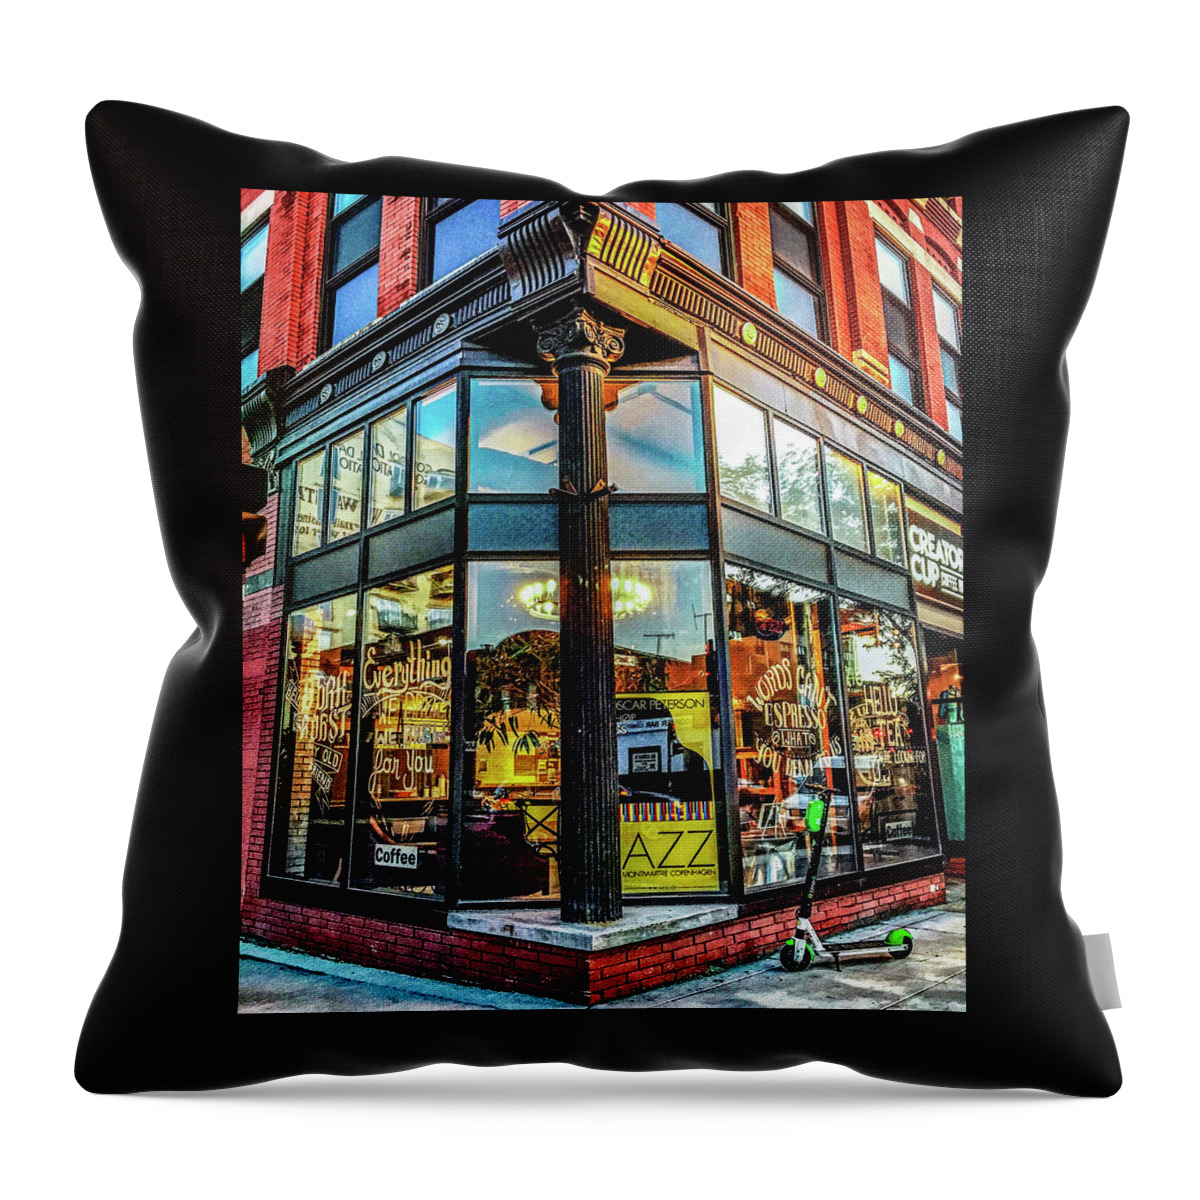 Creators Space Throw Pillow featuring the photograph Creators Space by David Ralph Johnson